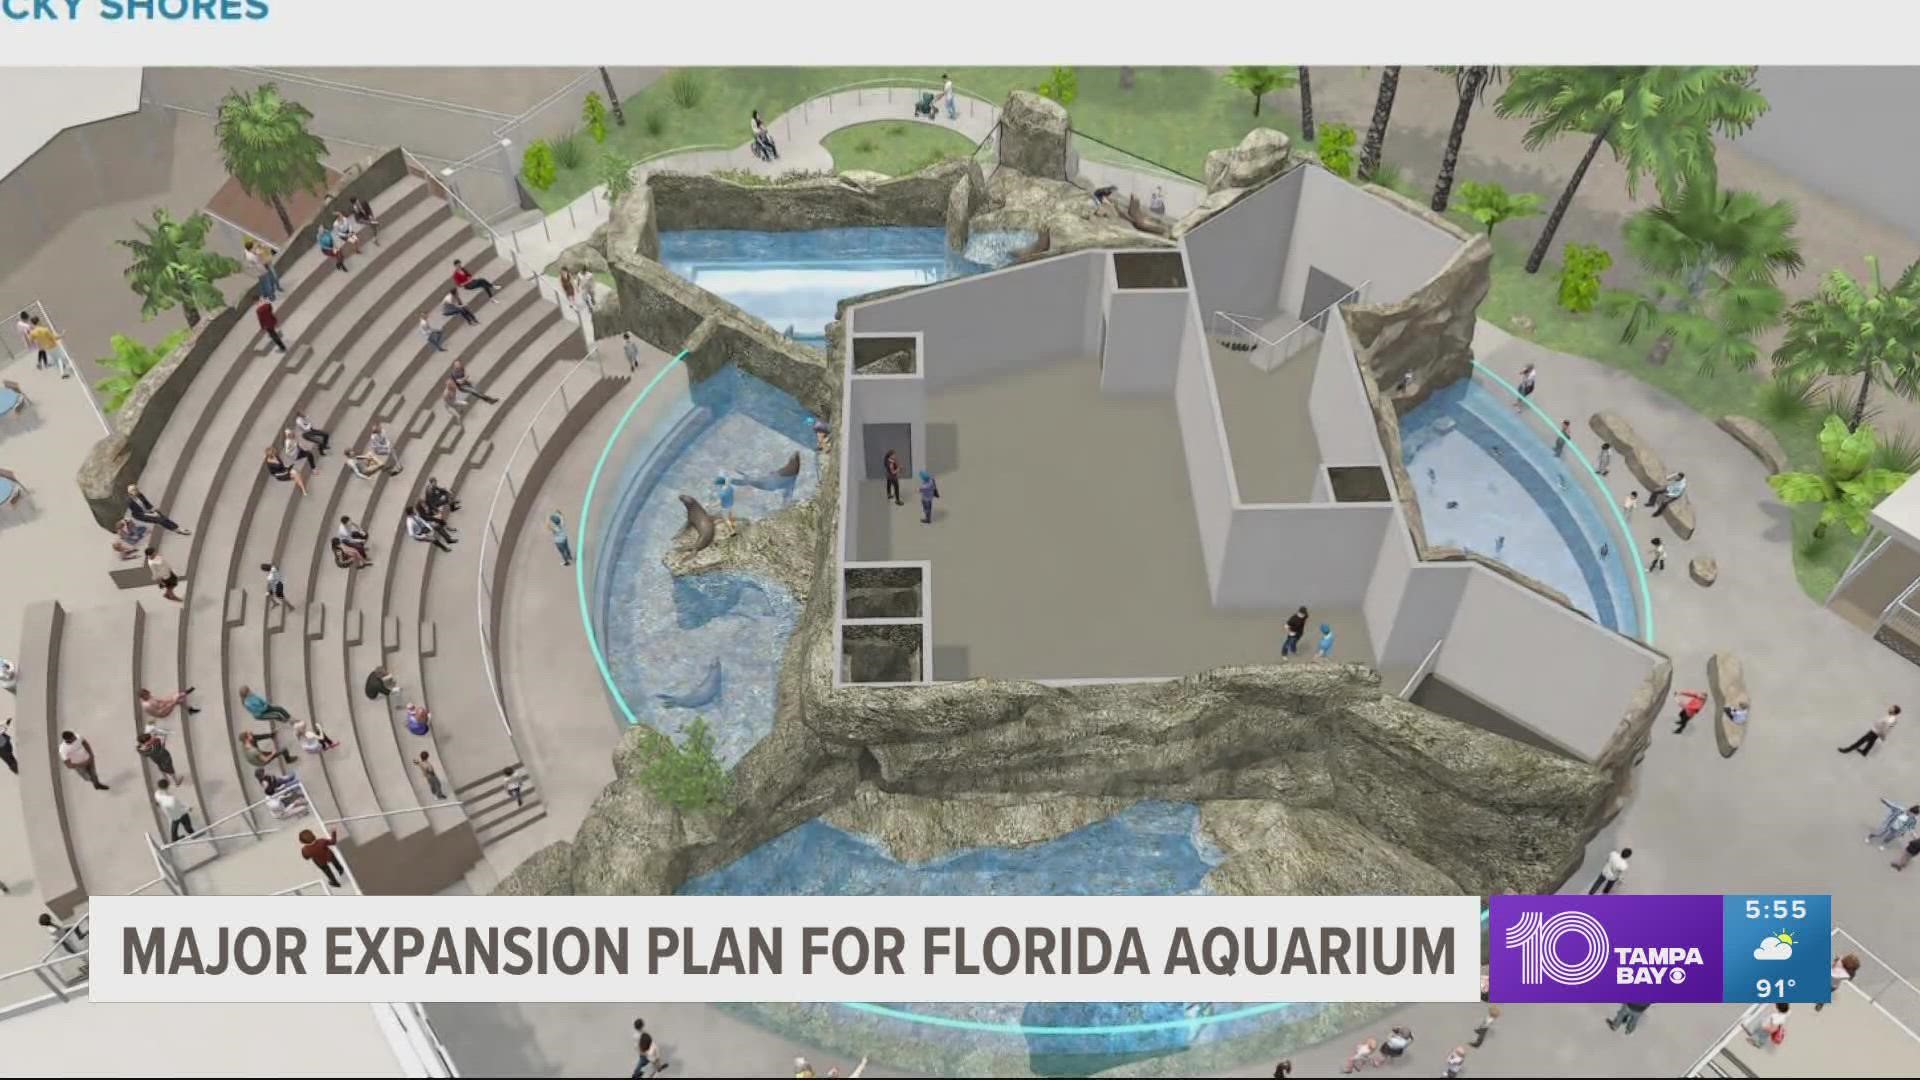 This project marks the first big expansion for the aquarium since its opening in 1995.